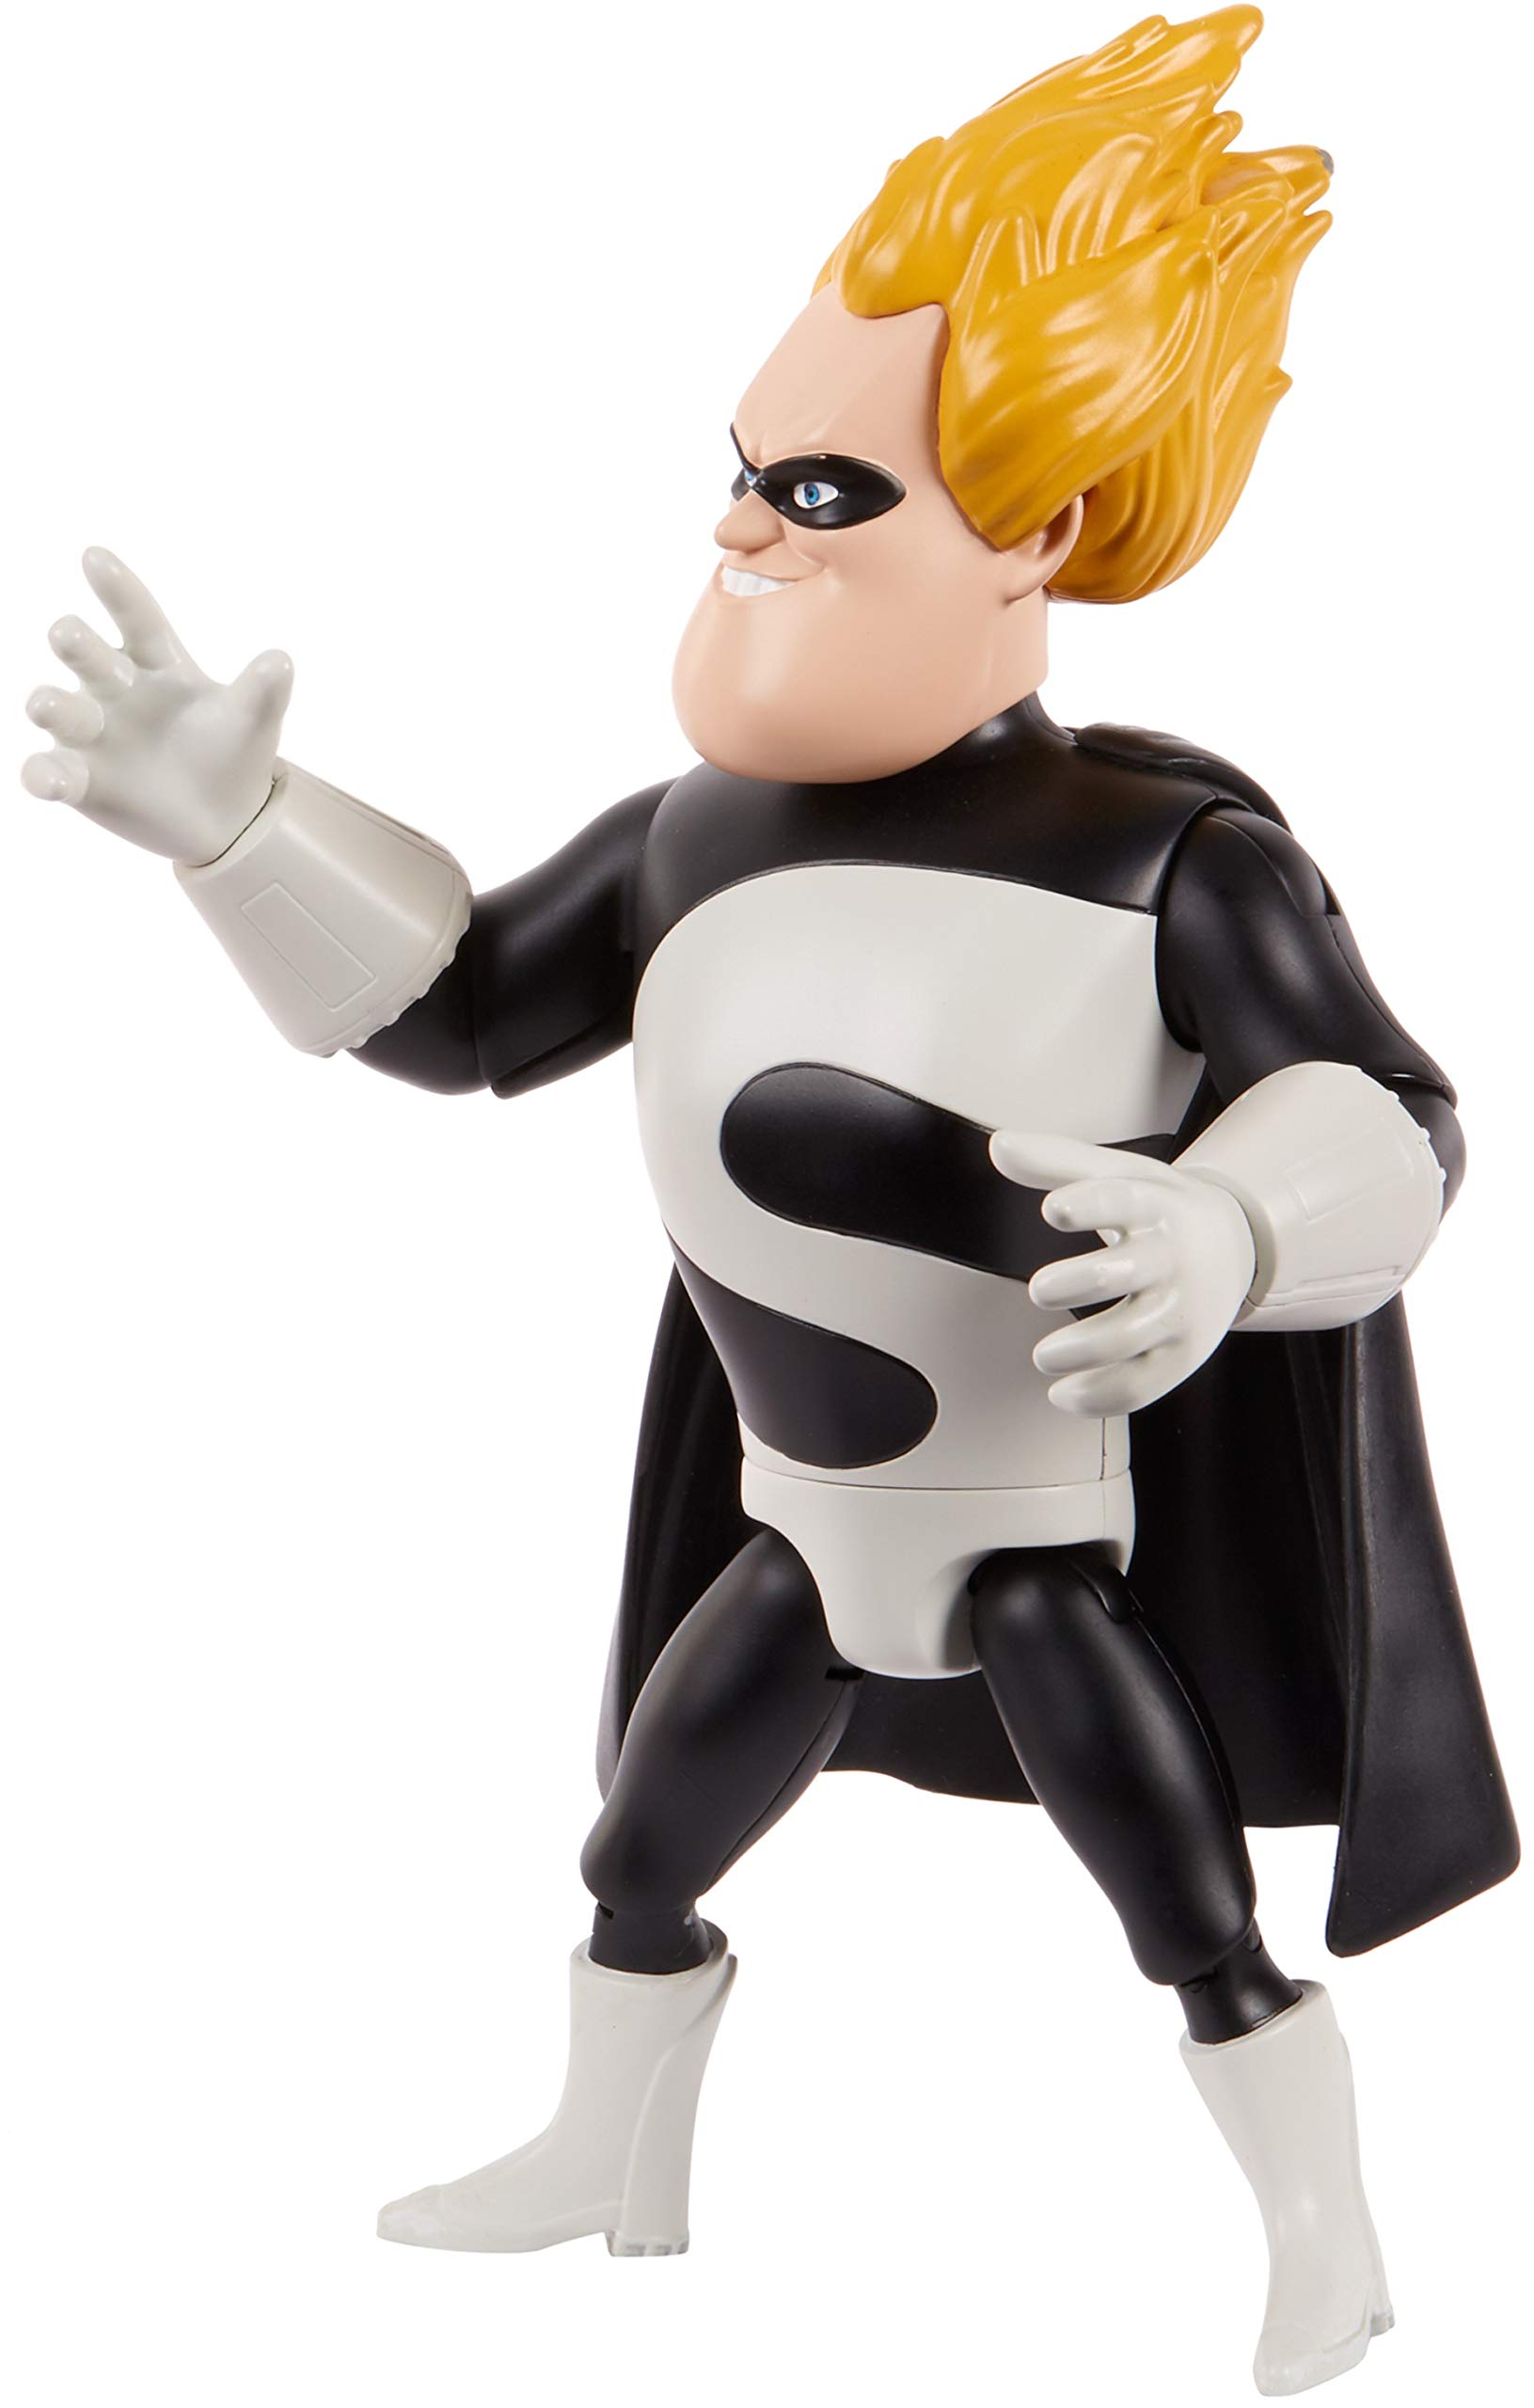 7" Disney Incredibles: Syndrome Action Figure $3.18, Mr. Incredible $3.77